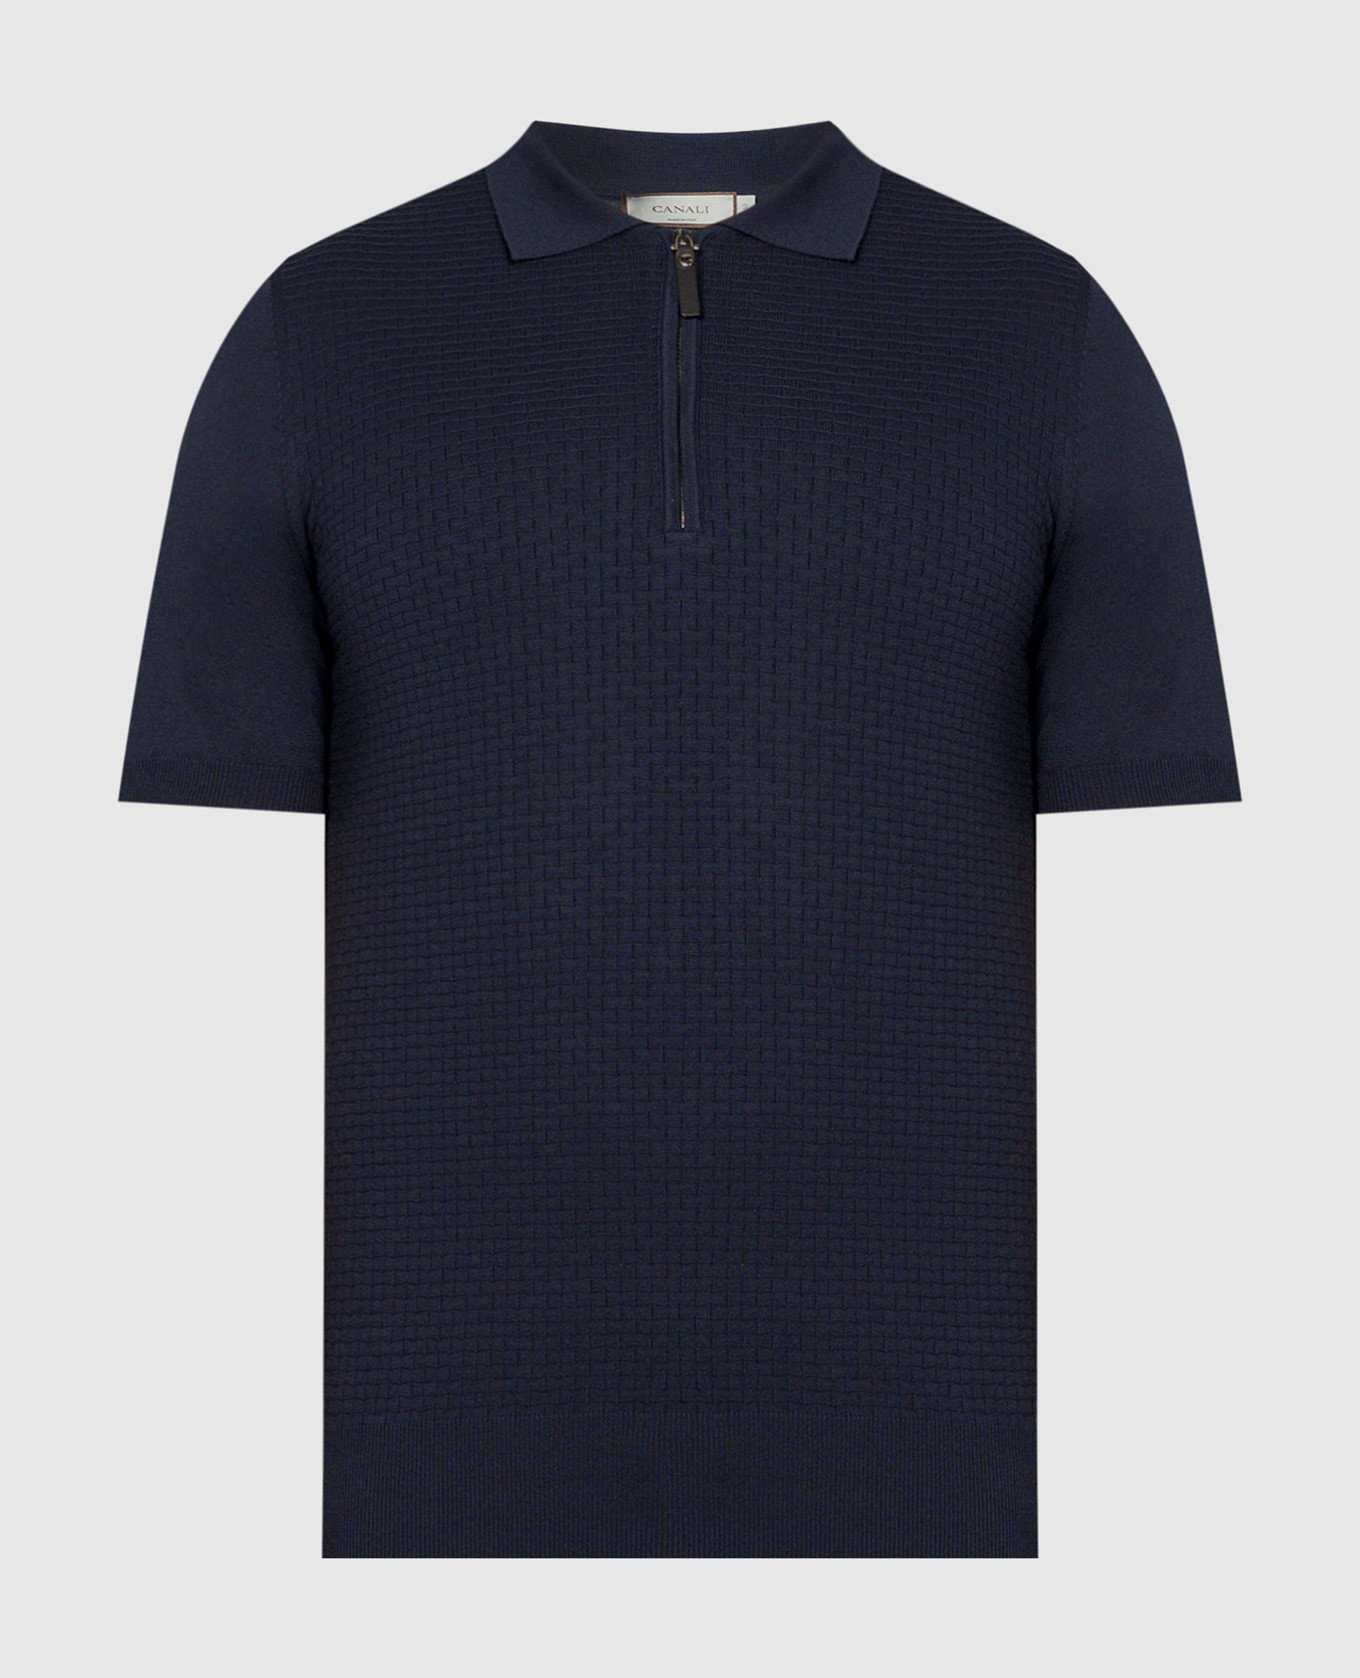 Blue polo in a textured pattern